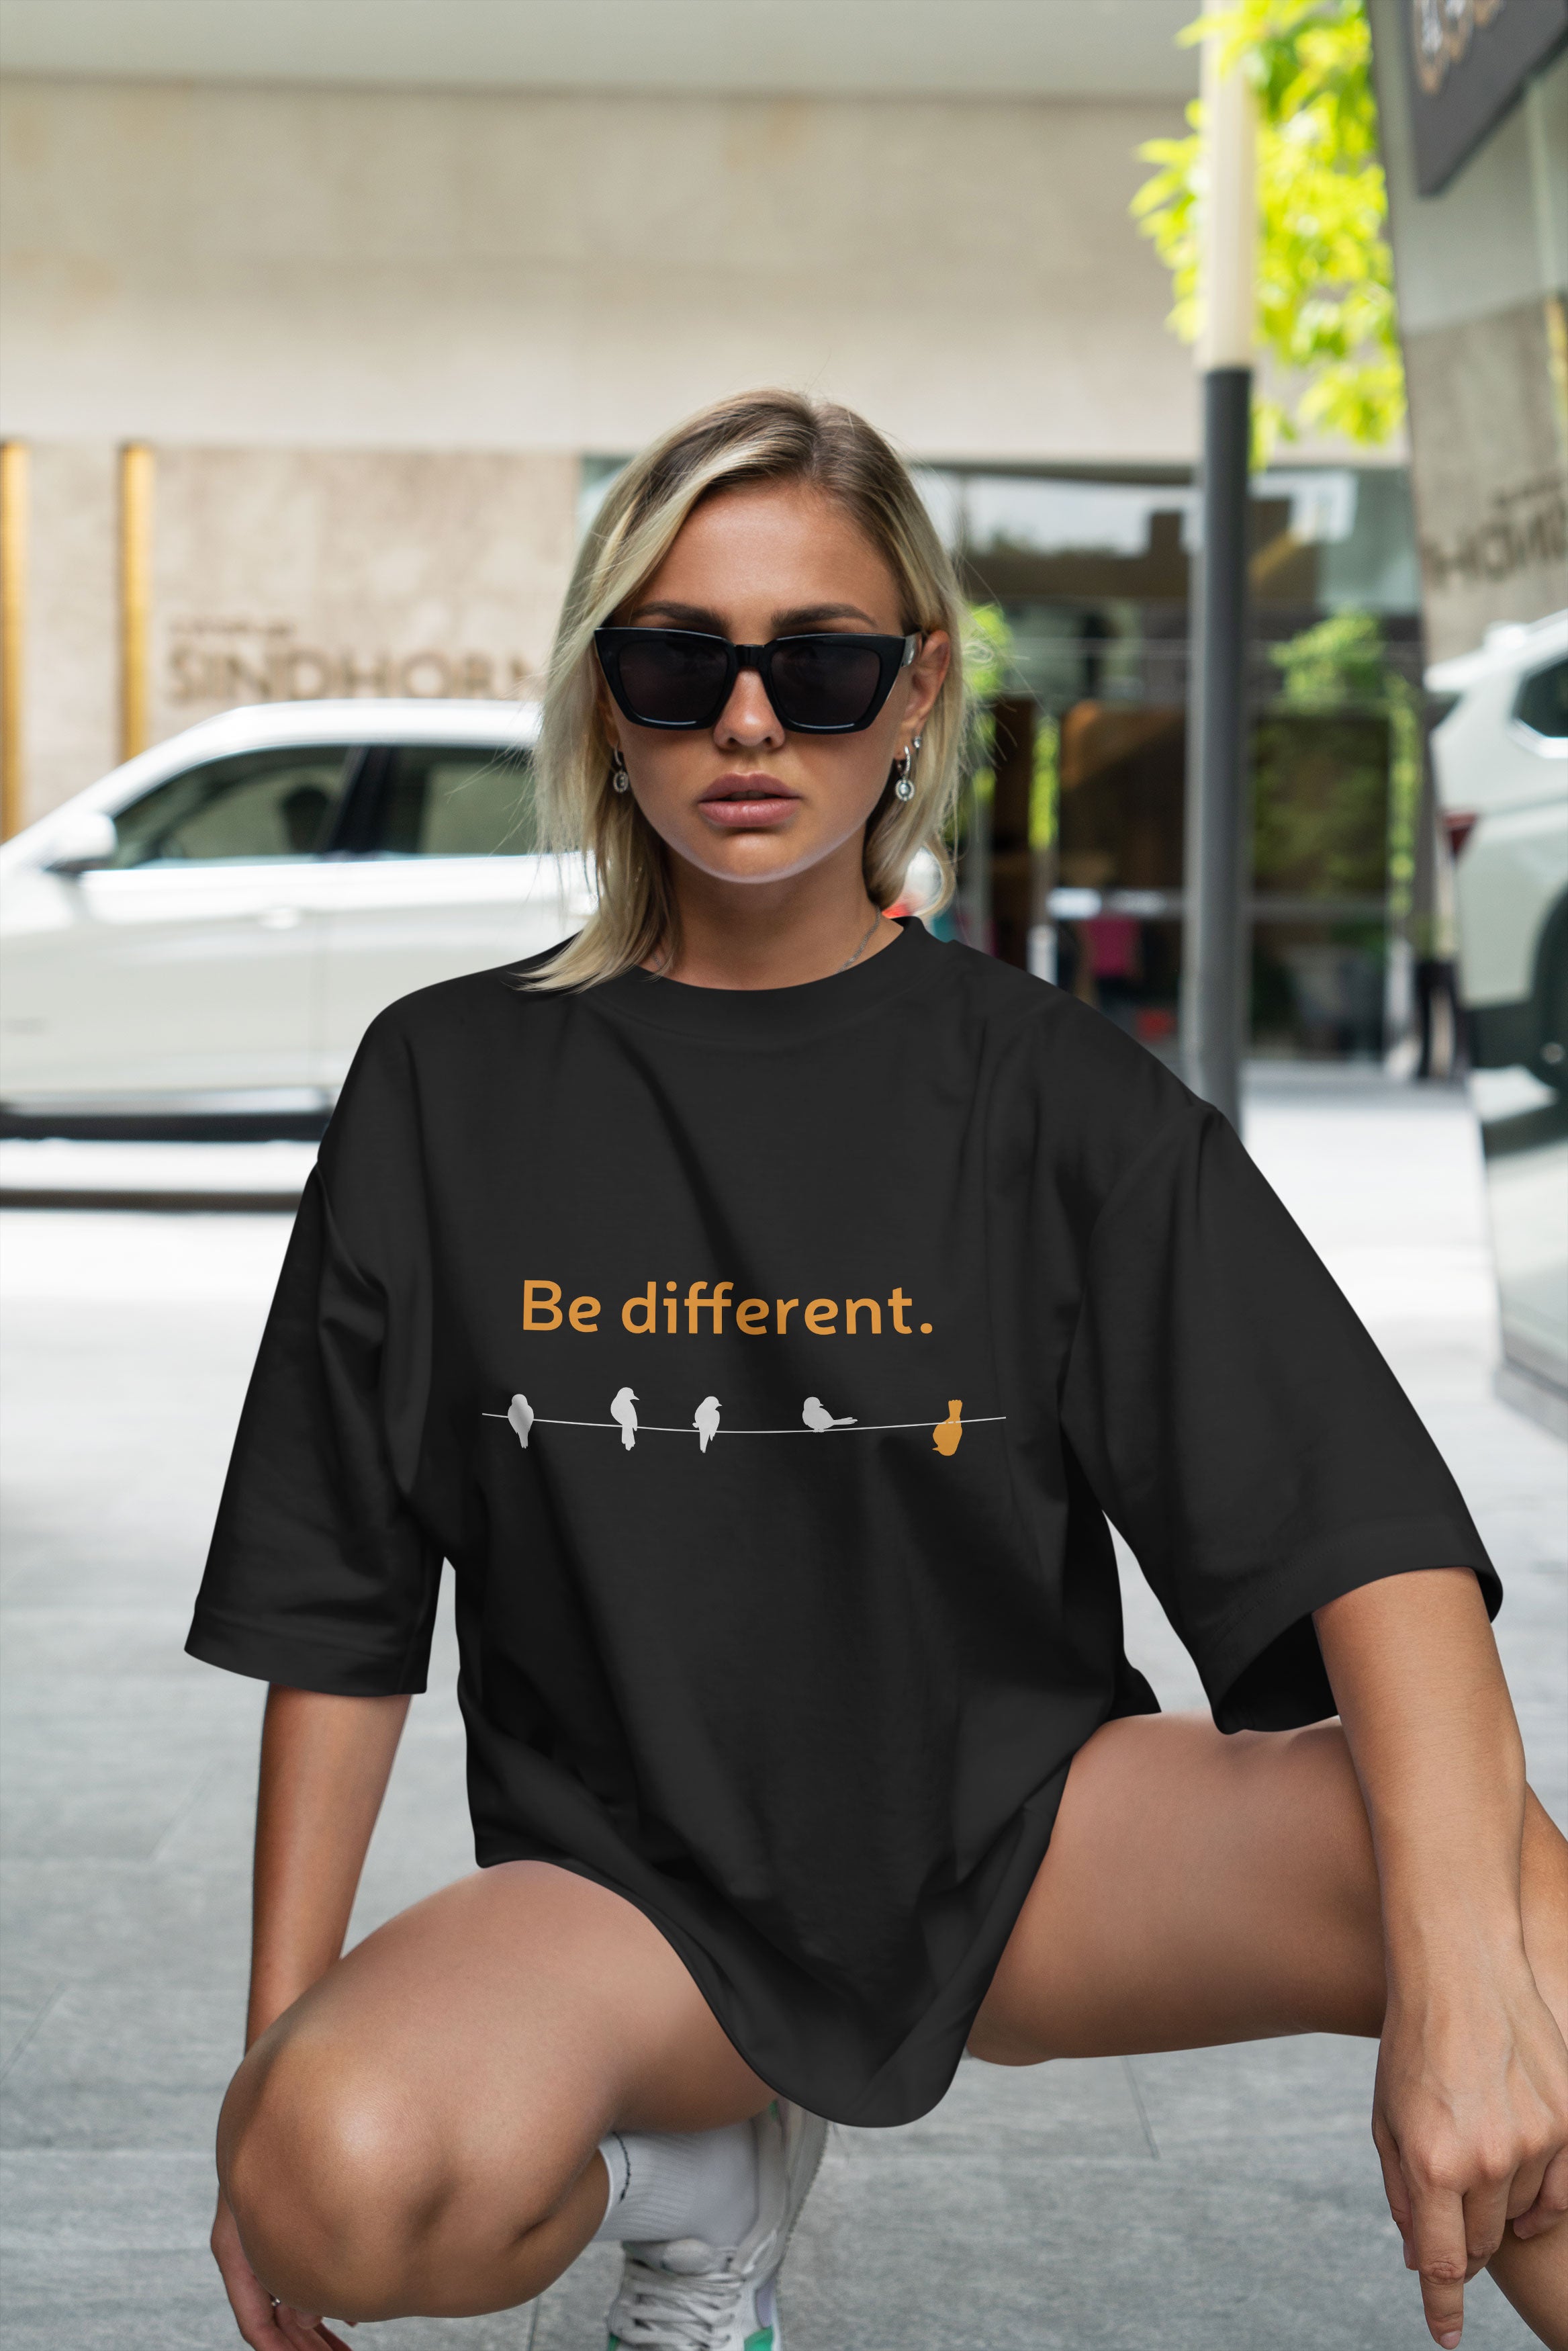 Brewing Hot Oversized Tshirt Unisex Be Different Tshirts